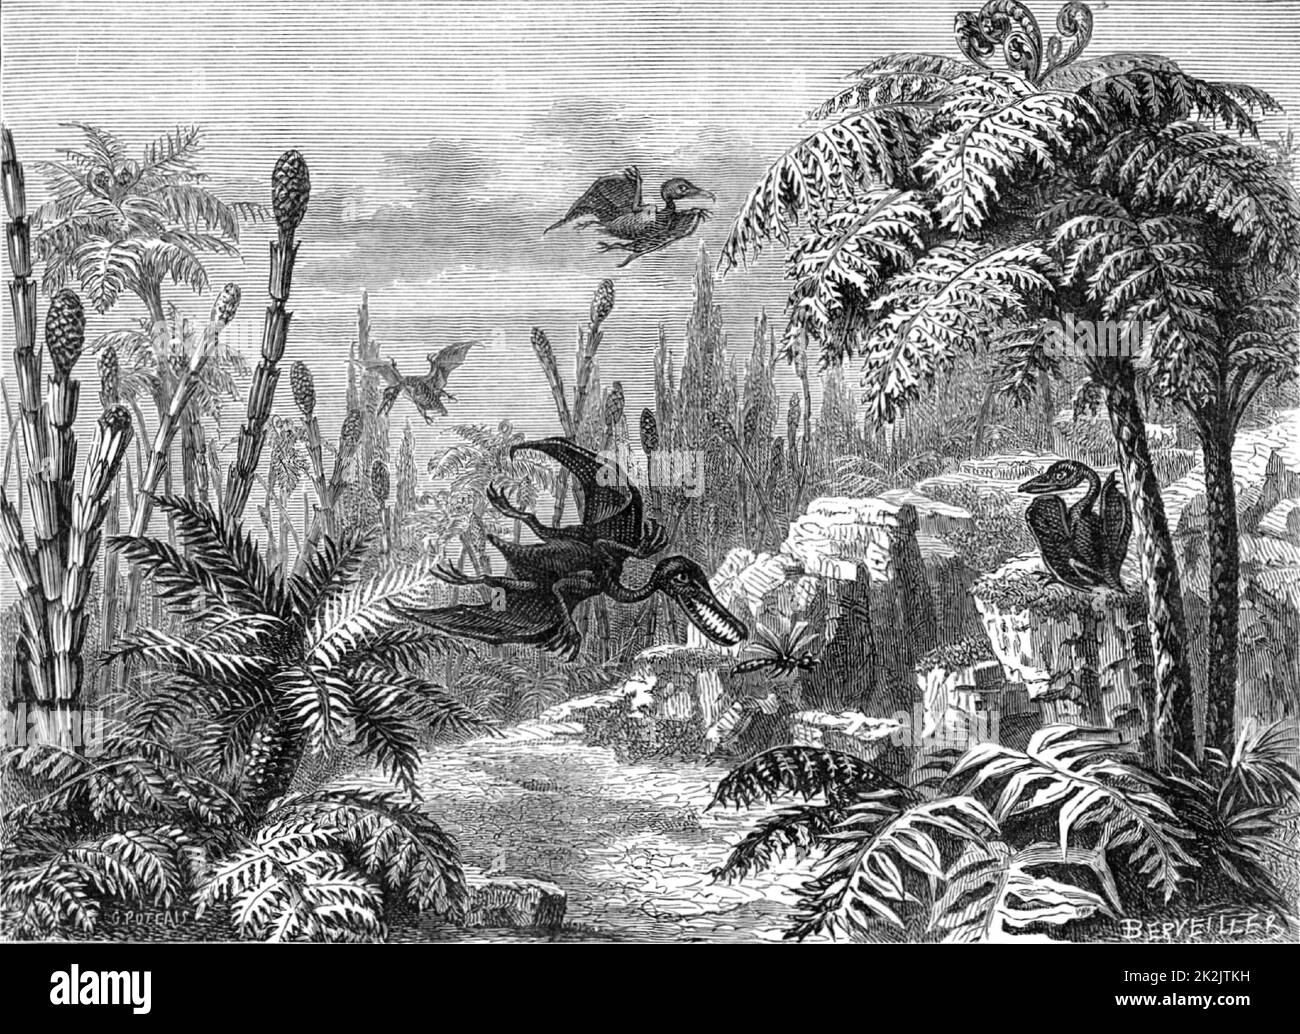 Scene during the Lias period, showing Pterodactyls, a dragonfly, Equisetums, and Tree Ferns. From 'The Popular Encyclopaedia' (London, 1888). Engraving. Stock Photo